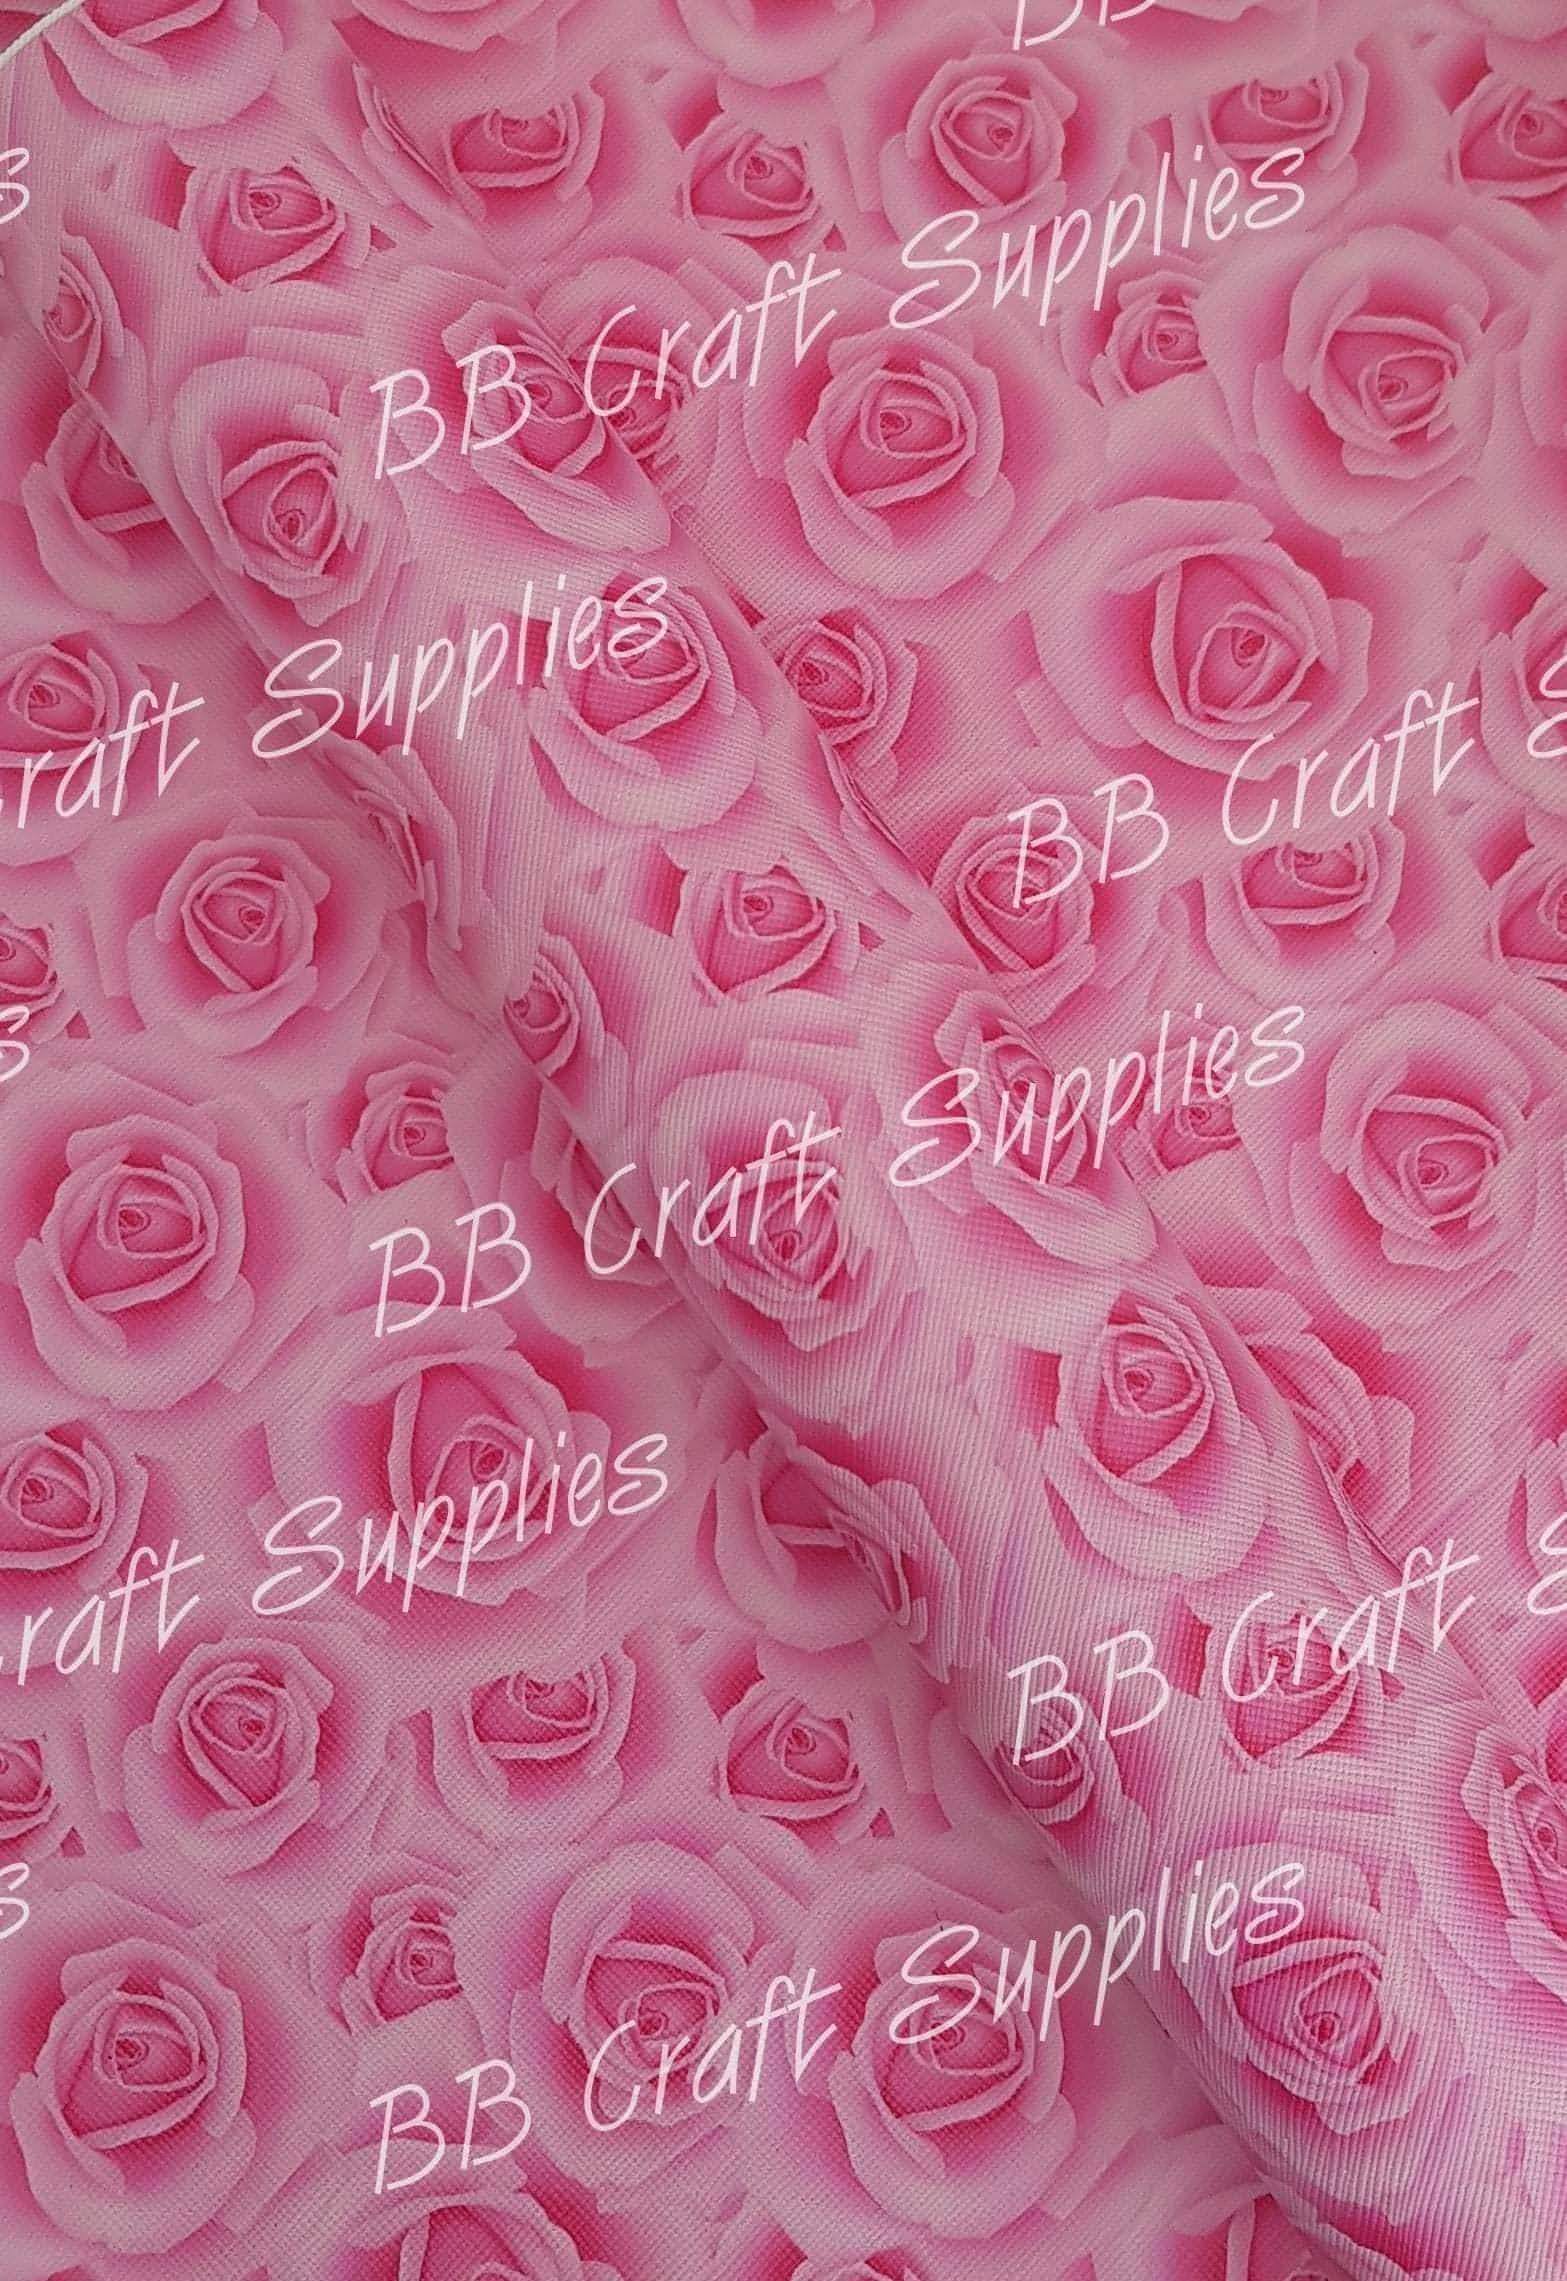 Roses Pink Large Faux Leather - Faux, Faux Leather, Leather, leatherette - Bare Butler Faux Leather Supplies 